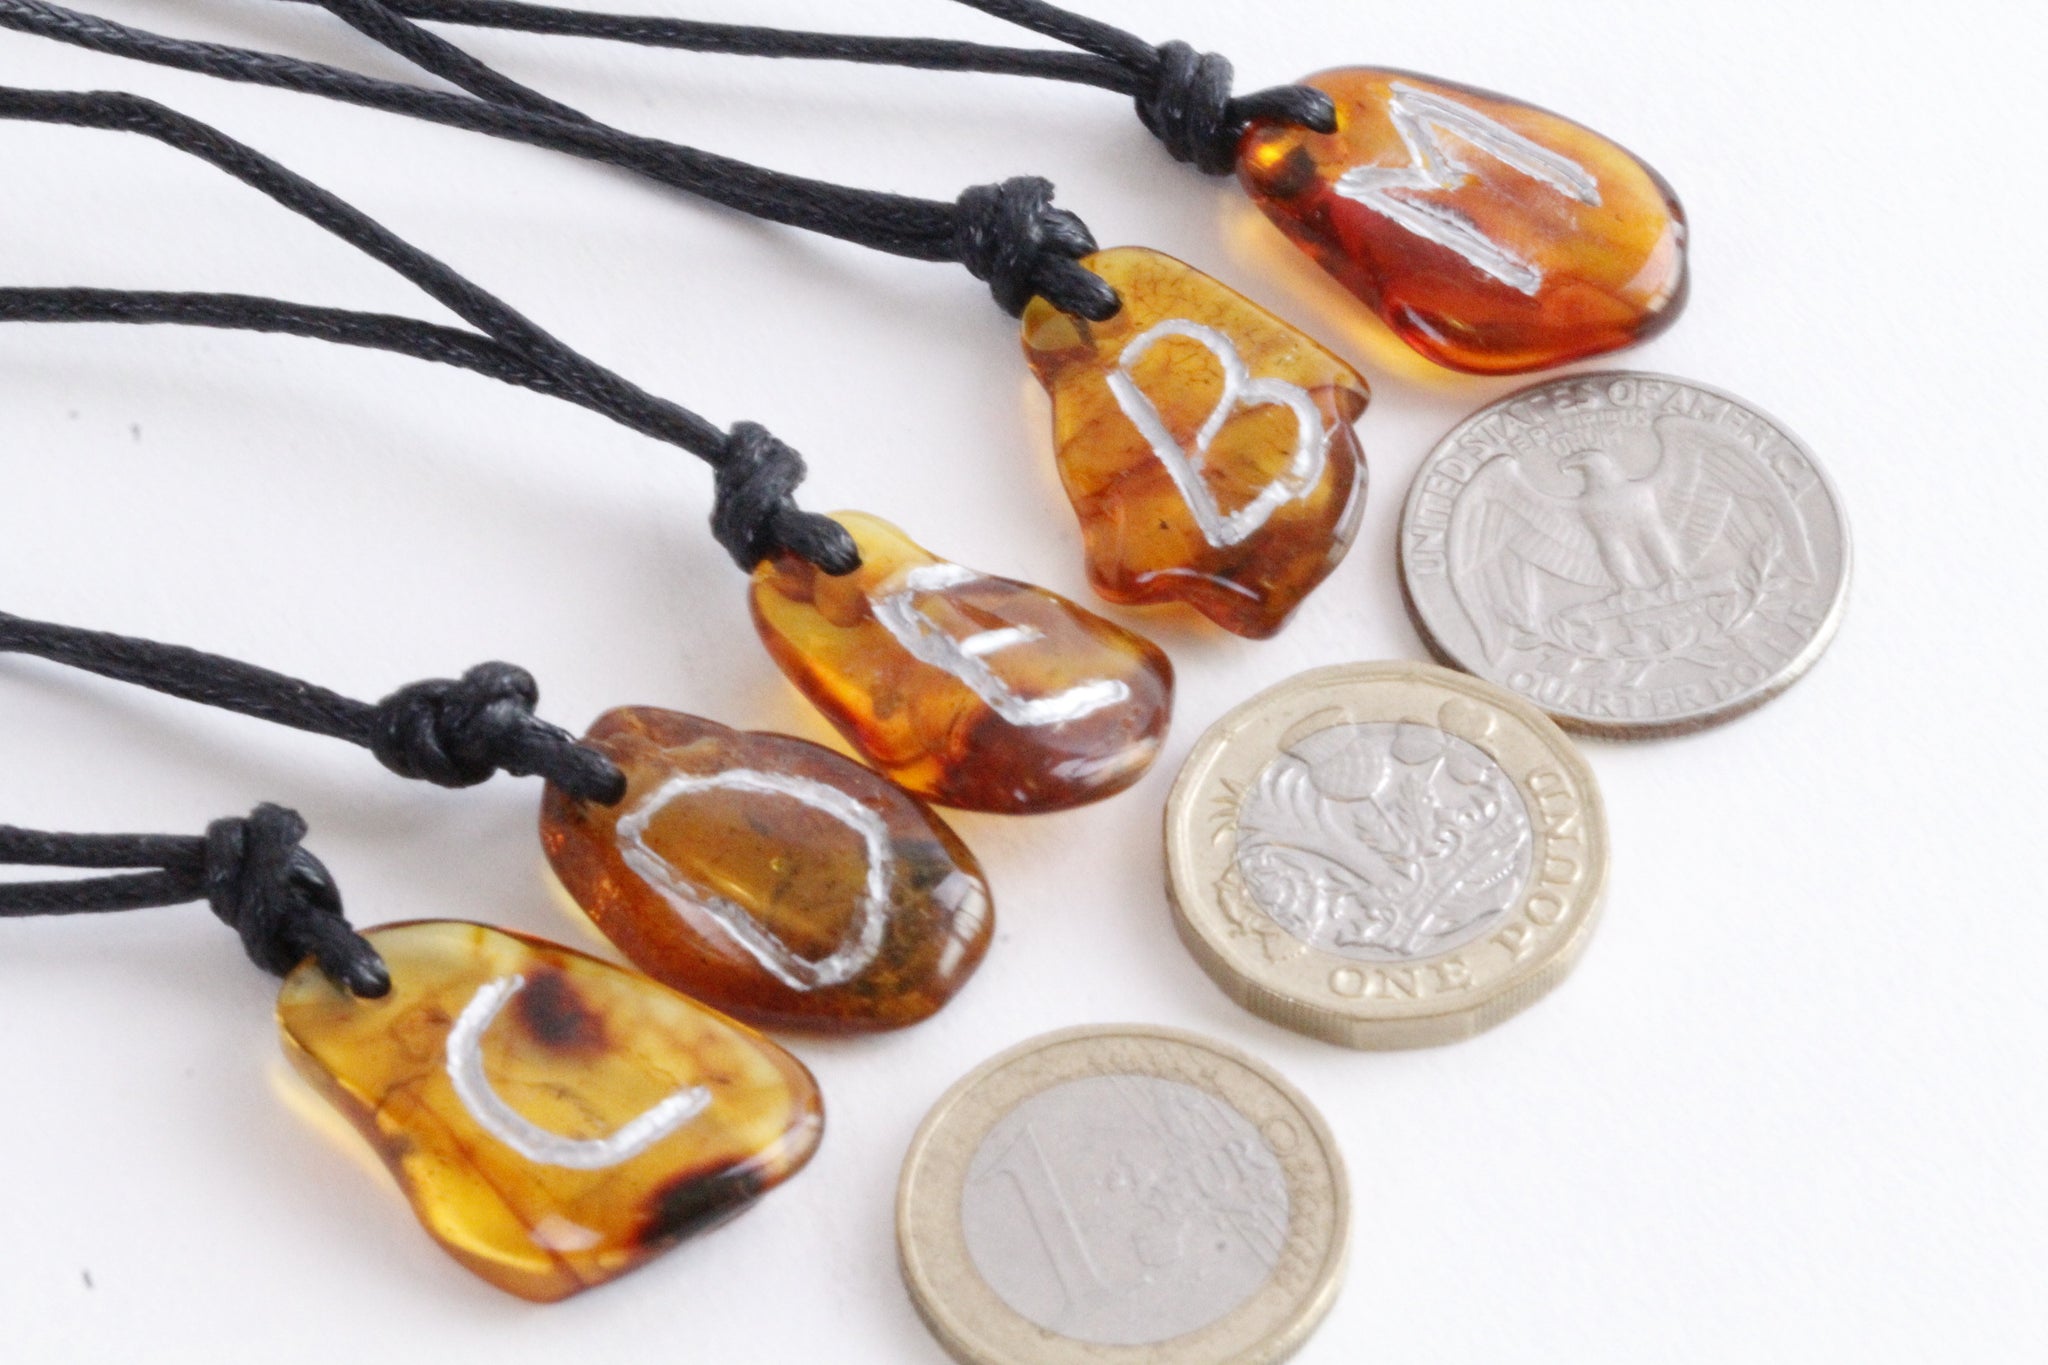 Personalize your Amulet